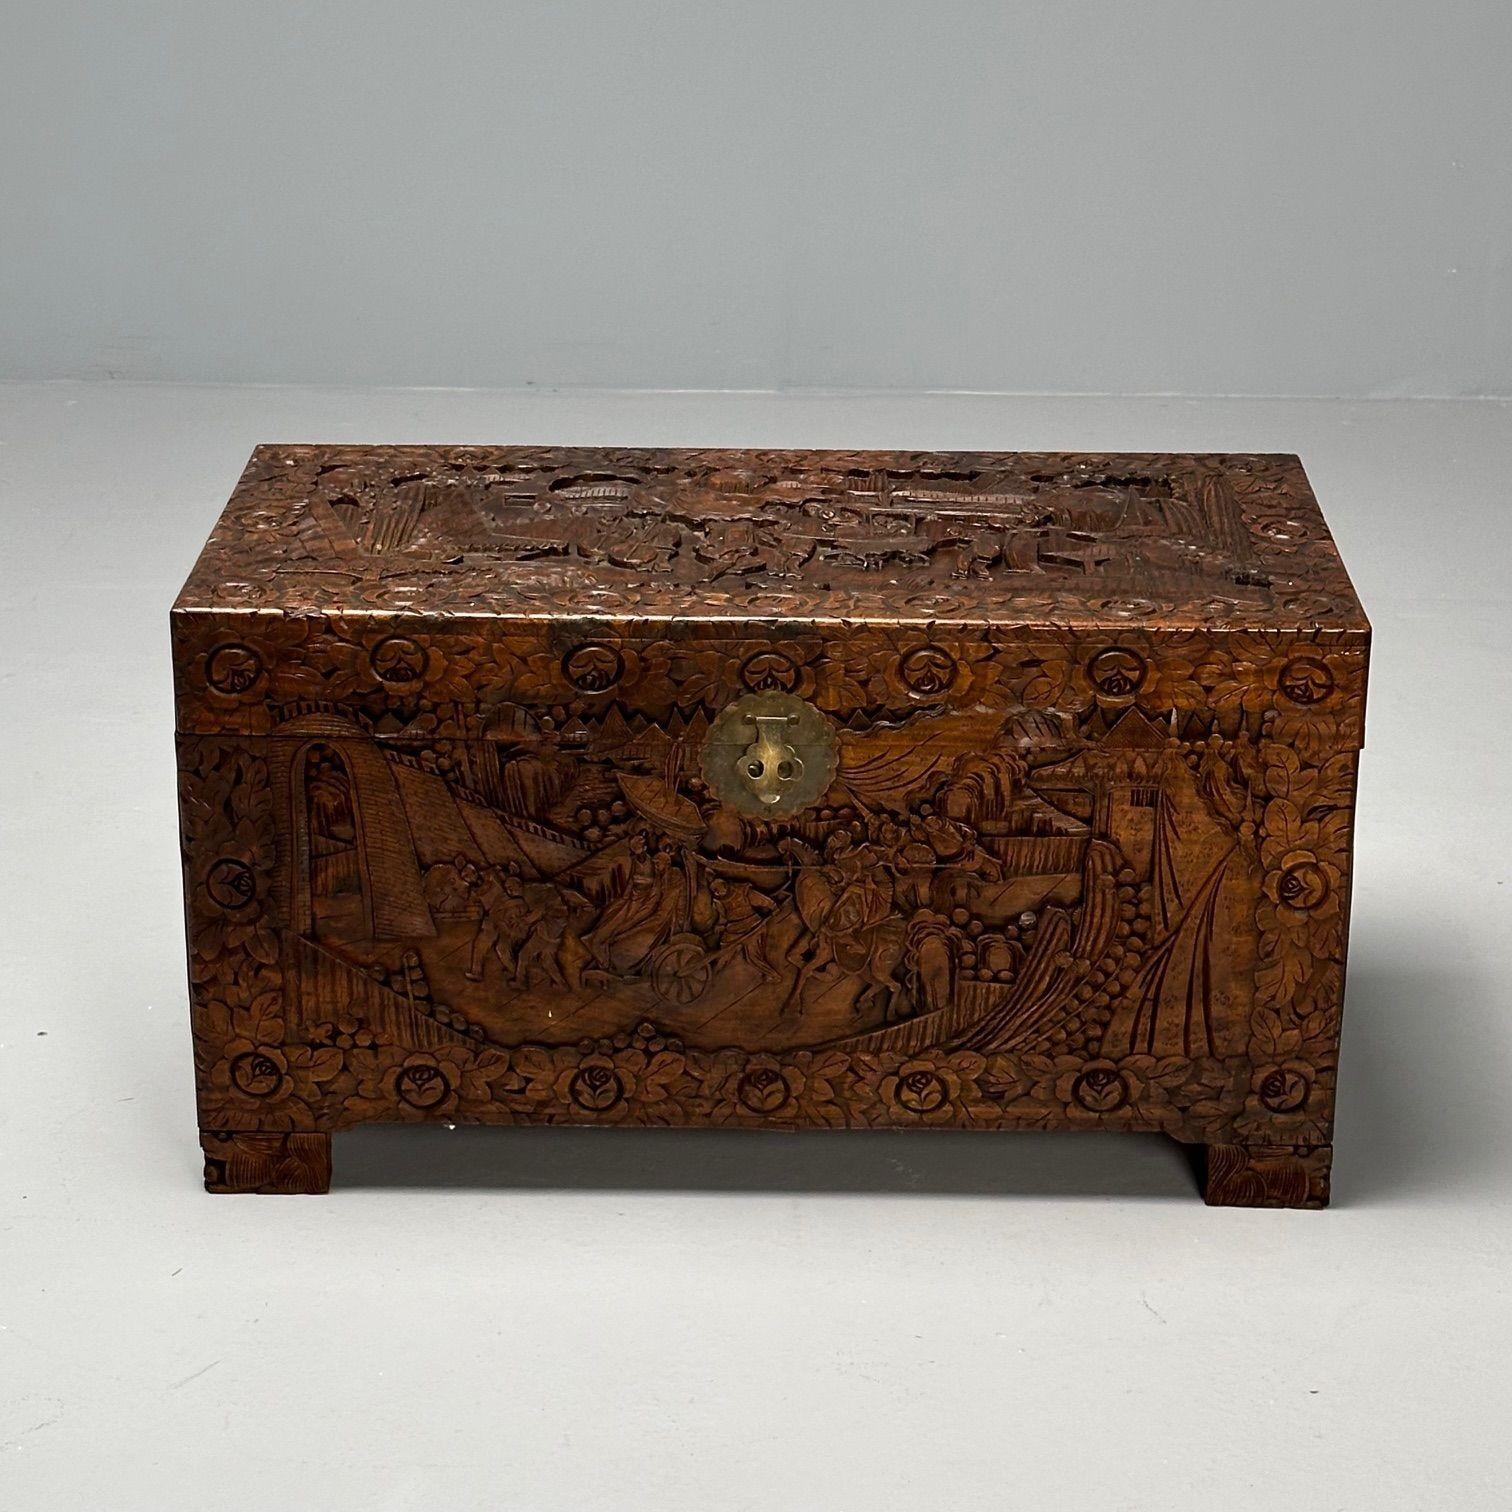 Chinese Export, Storage Trunk, Dowry, Walnut, Carved, Burn Mark, China, 1930s

A 19th or 20th Century Storage Trunk or Dowry. A solid wood finely carved chest having full body figures, men riding animals, pagoda and floral design all over. The